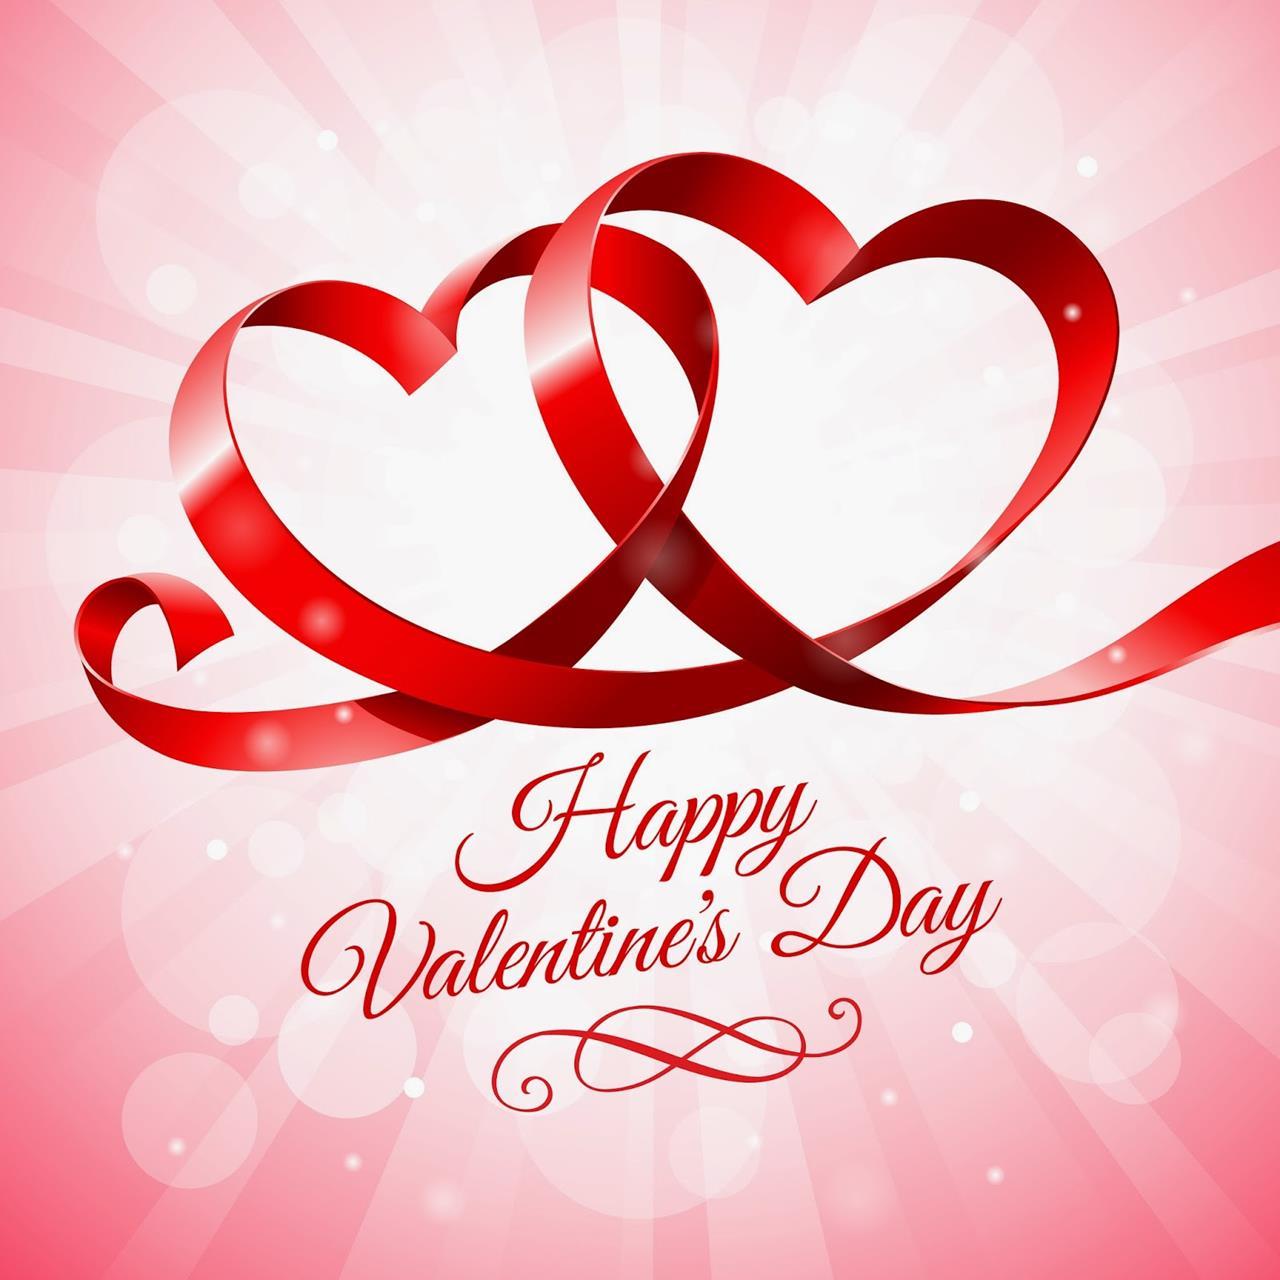 Valentines Day Greetings February Valentine Day, Download